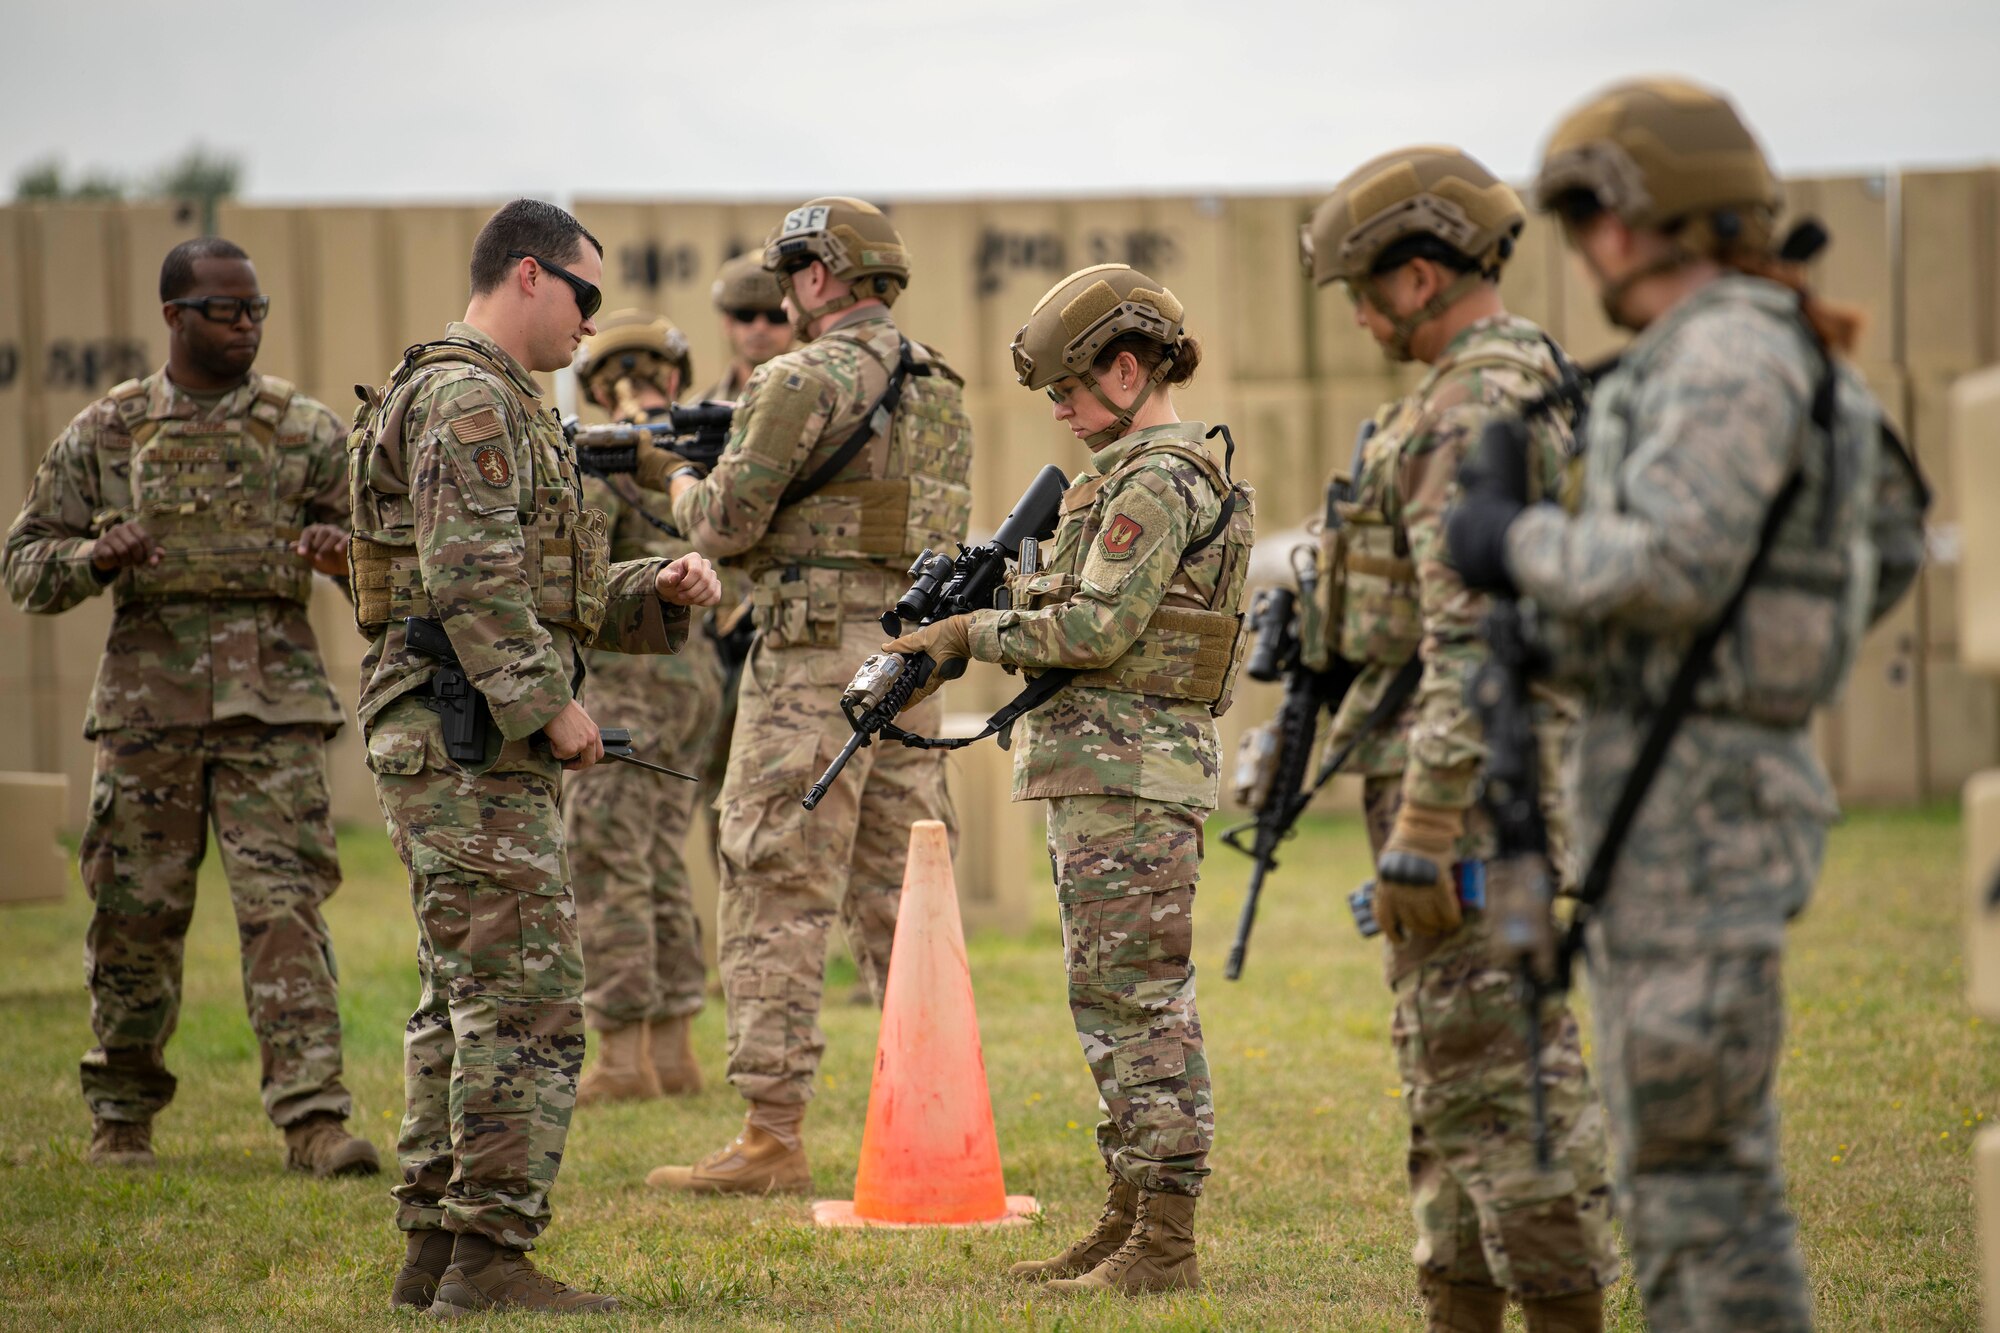 Chief Master Sgt. Kathi Glascock, center, 100th Air Refueling Wing command chief, prepares an M4 Carbine for advanced shoot, move and communicate training with Airmen from the 100th Security Forces Squadron at RAF Mildenhall, England, Aug. 30, 2019.  The purpose of the training was for the defenders to demonstrate their advanced combat skills for the commander and command Chief. (U.S. Air Force photo by Senior Airman Luke Milano)